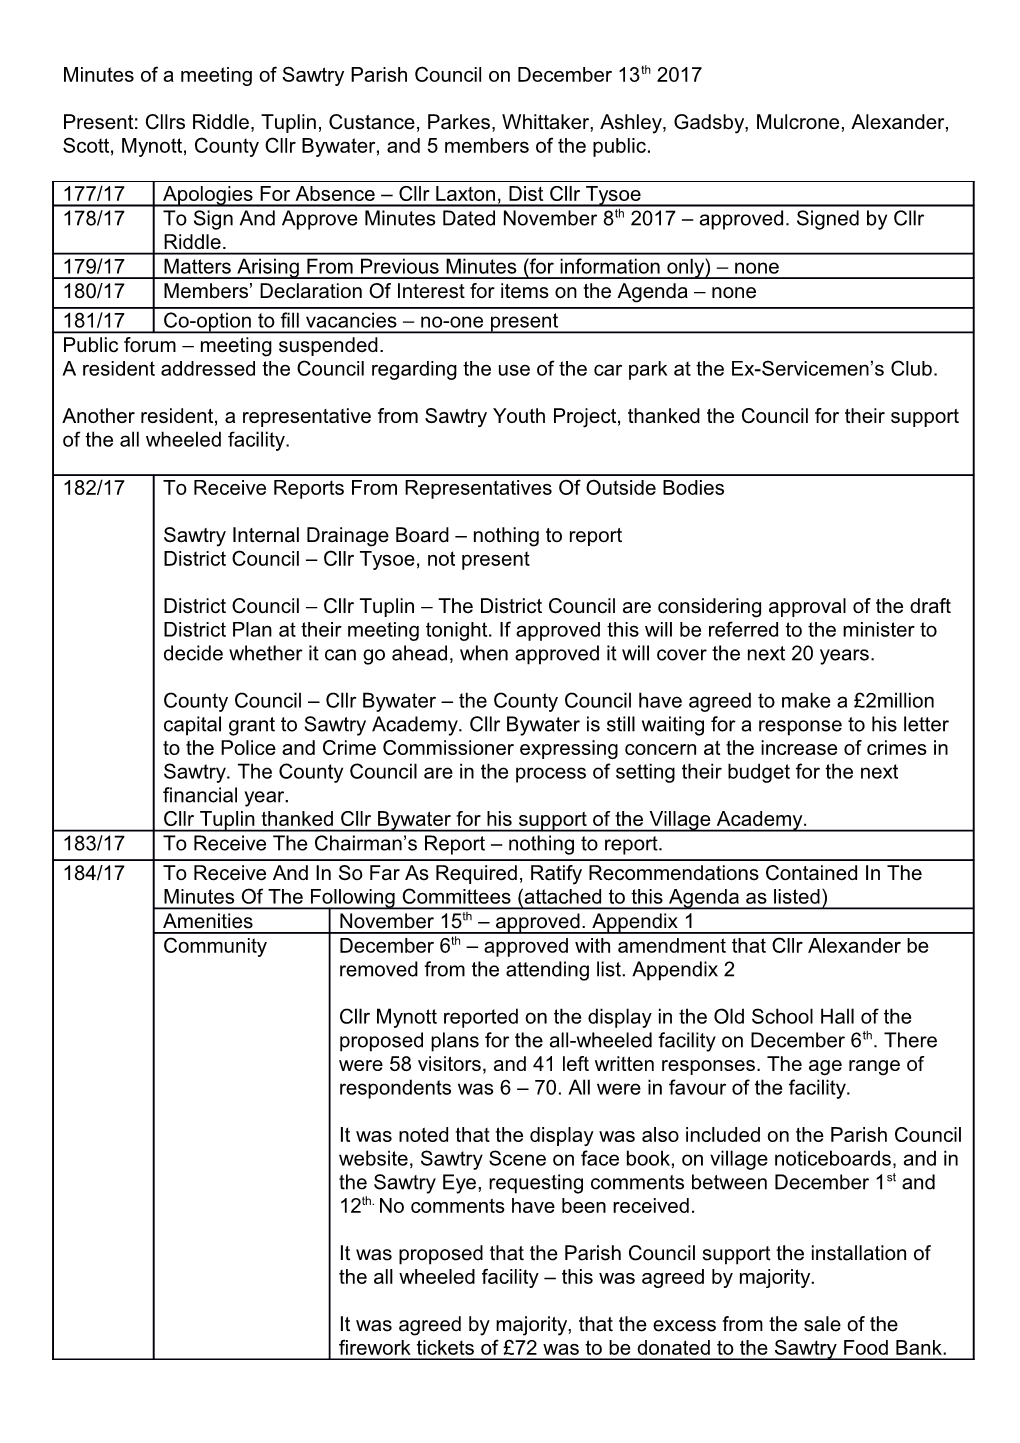 Minutes of a Meeting of Sawtry Parish Council on December 13Th 2017